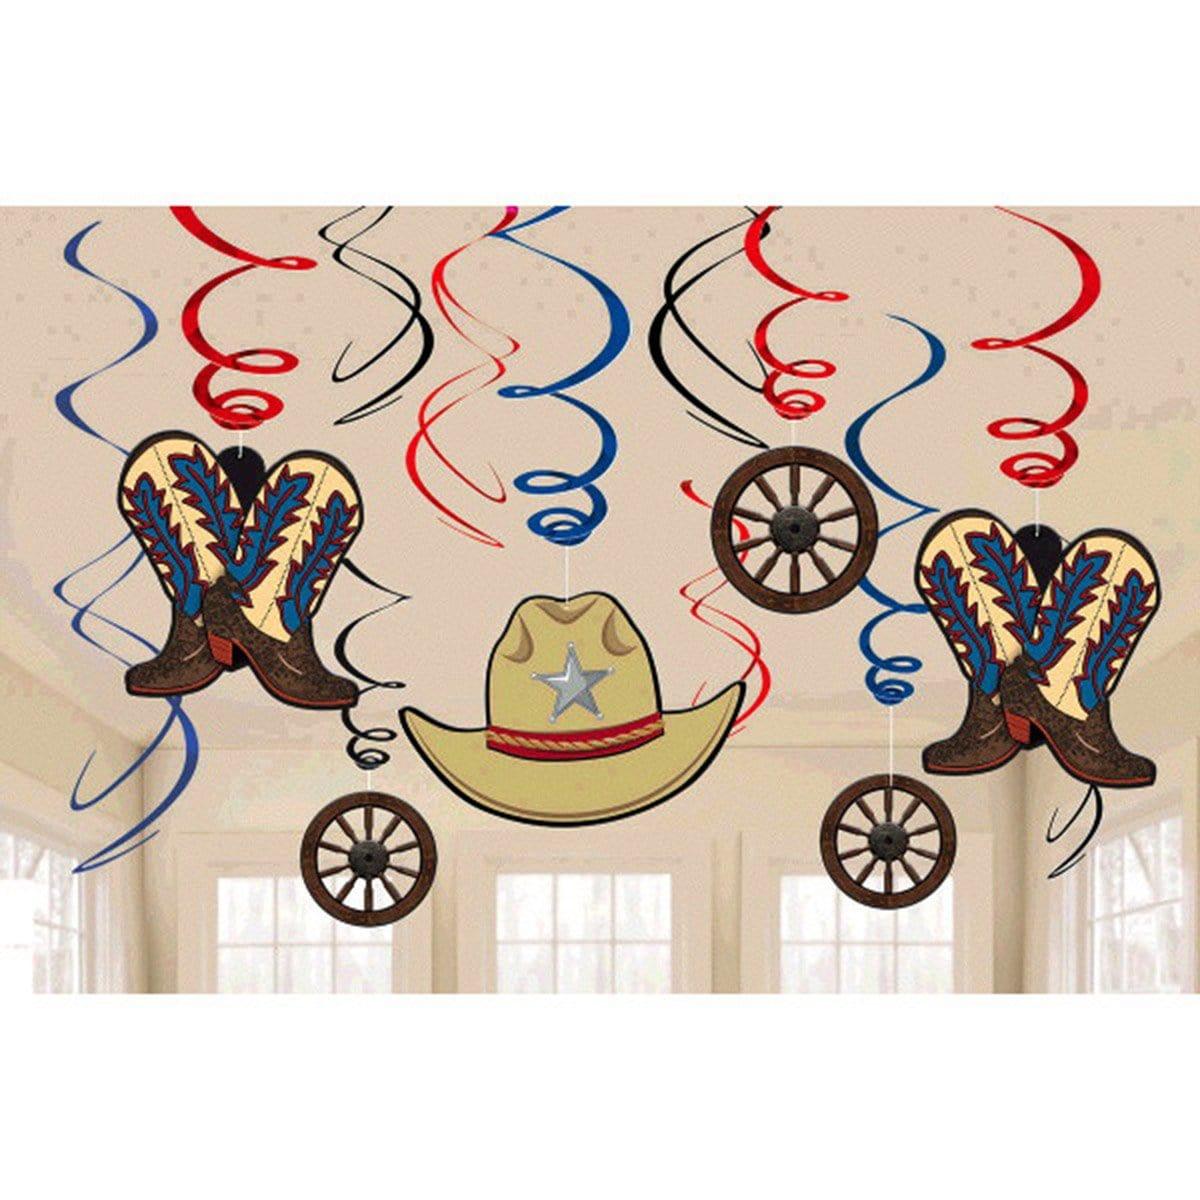 Buy Theme Party Western Swirl Decorations, 12 per Package sold at Party Expert